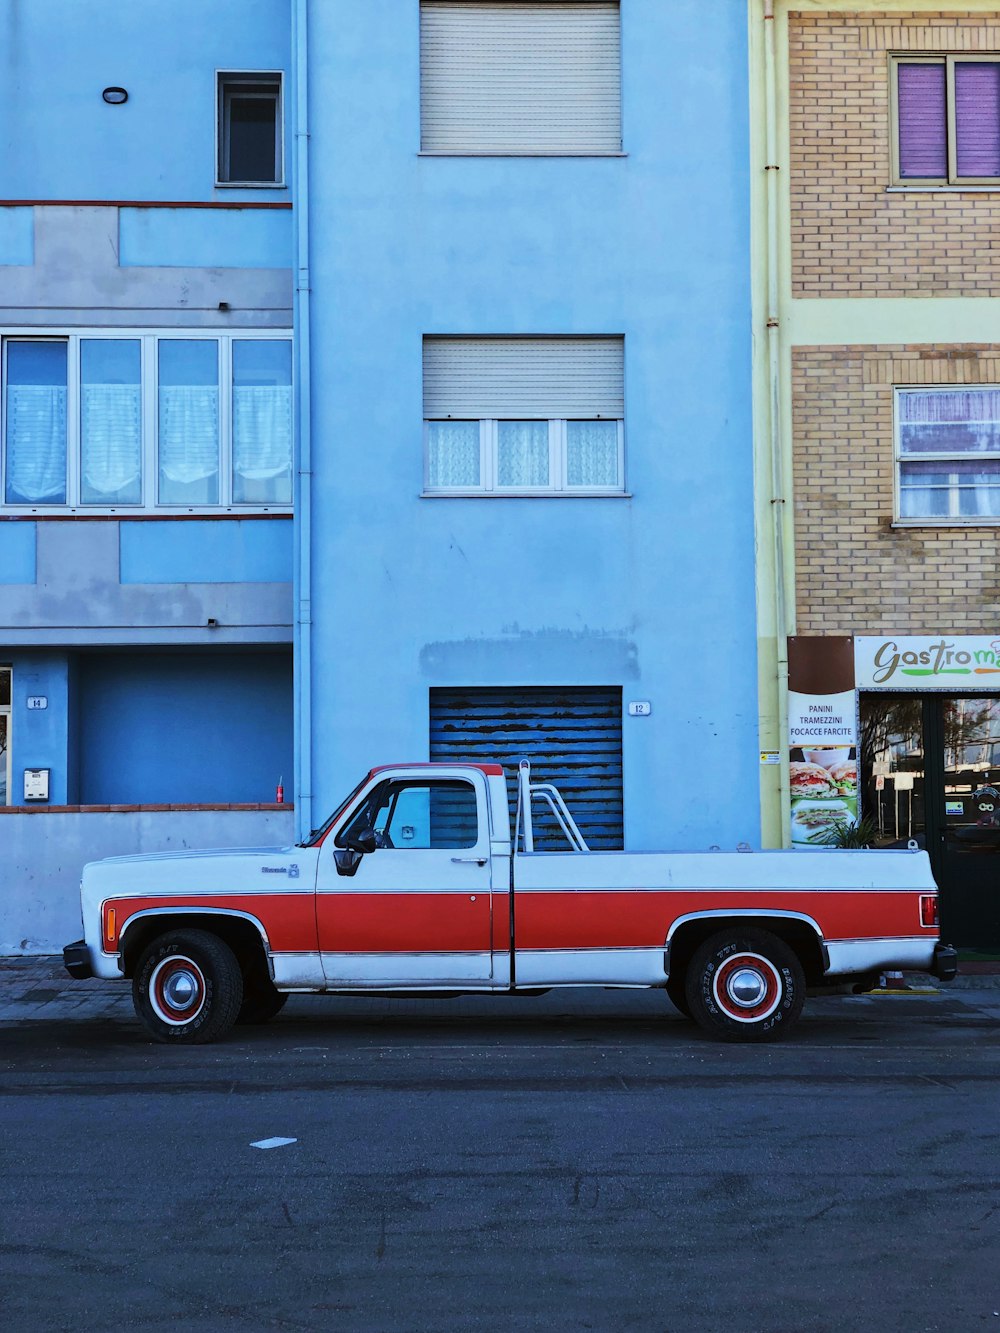 white and red single cab truck